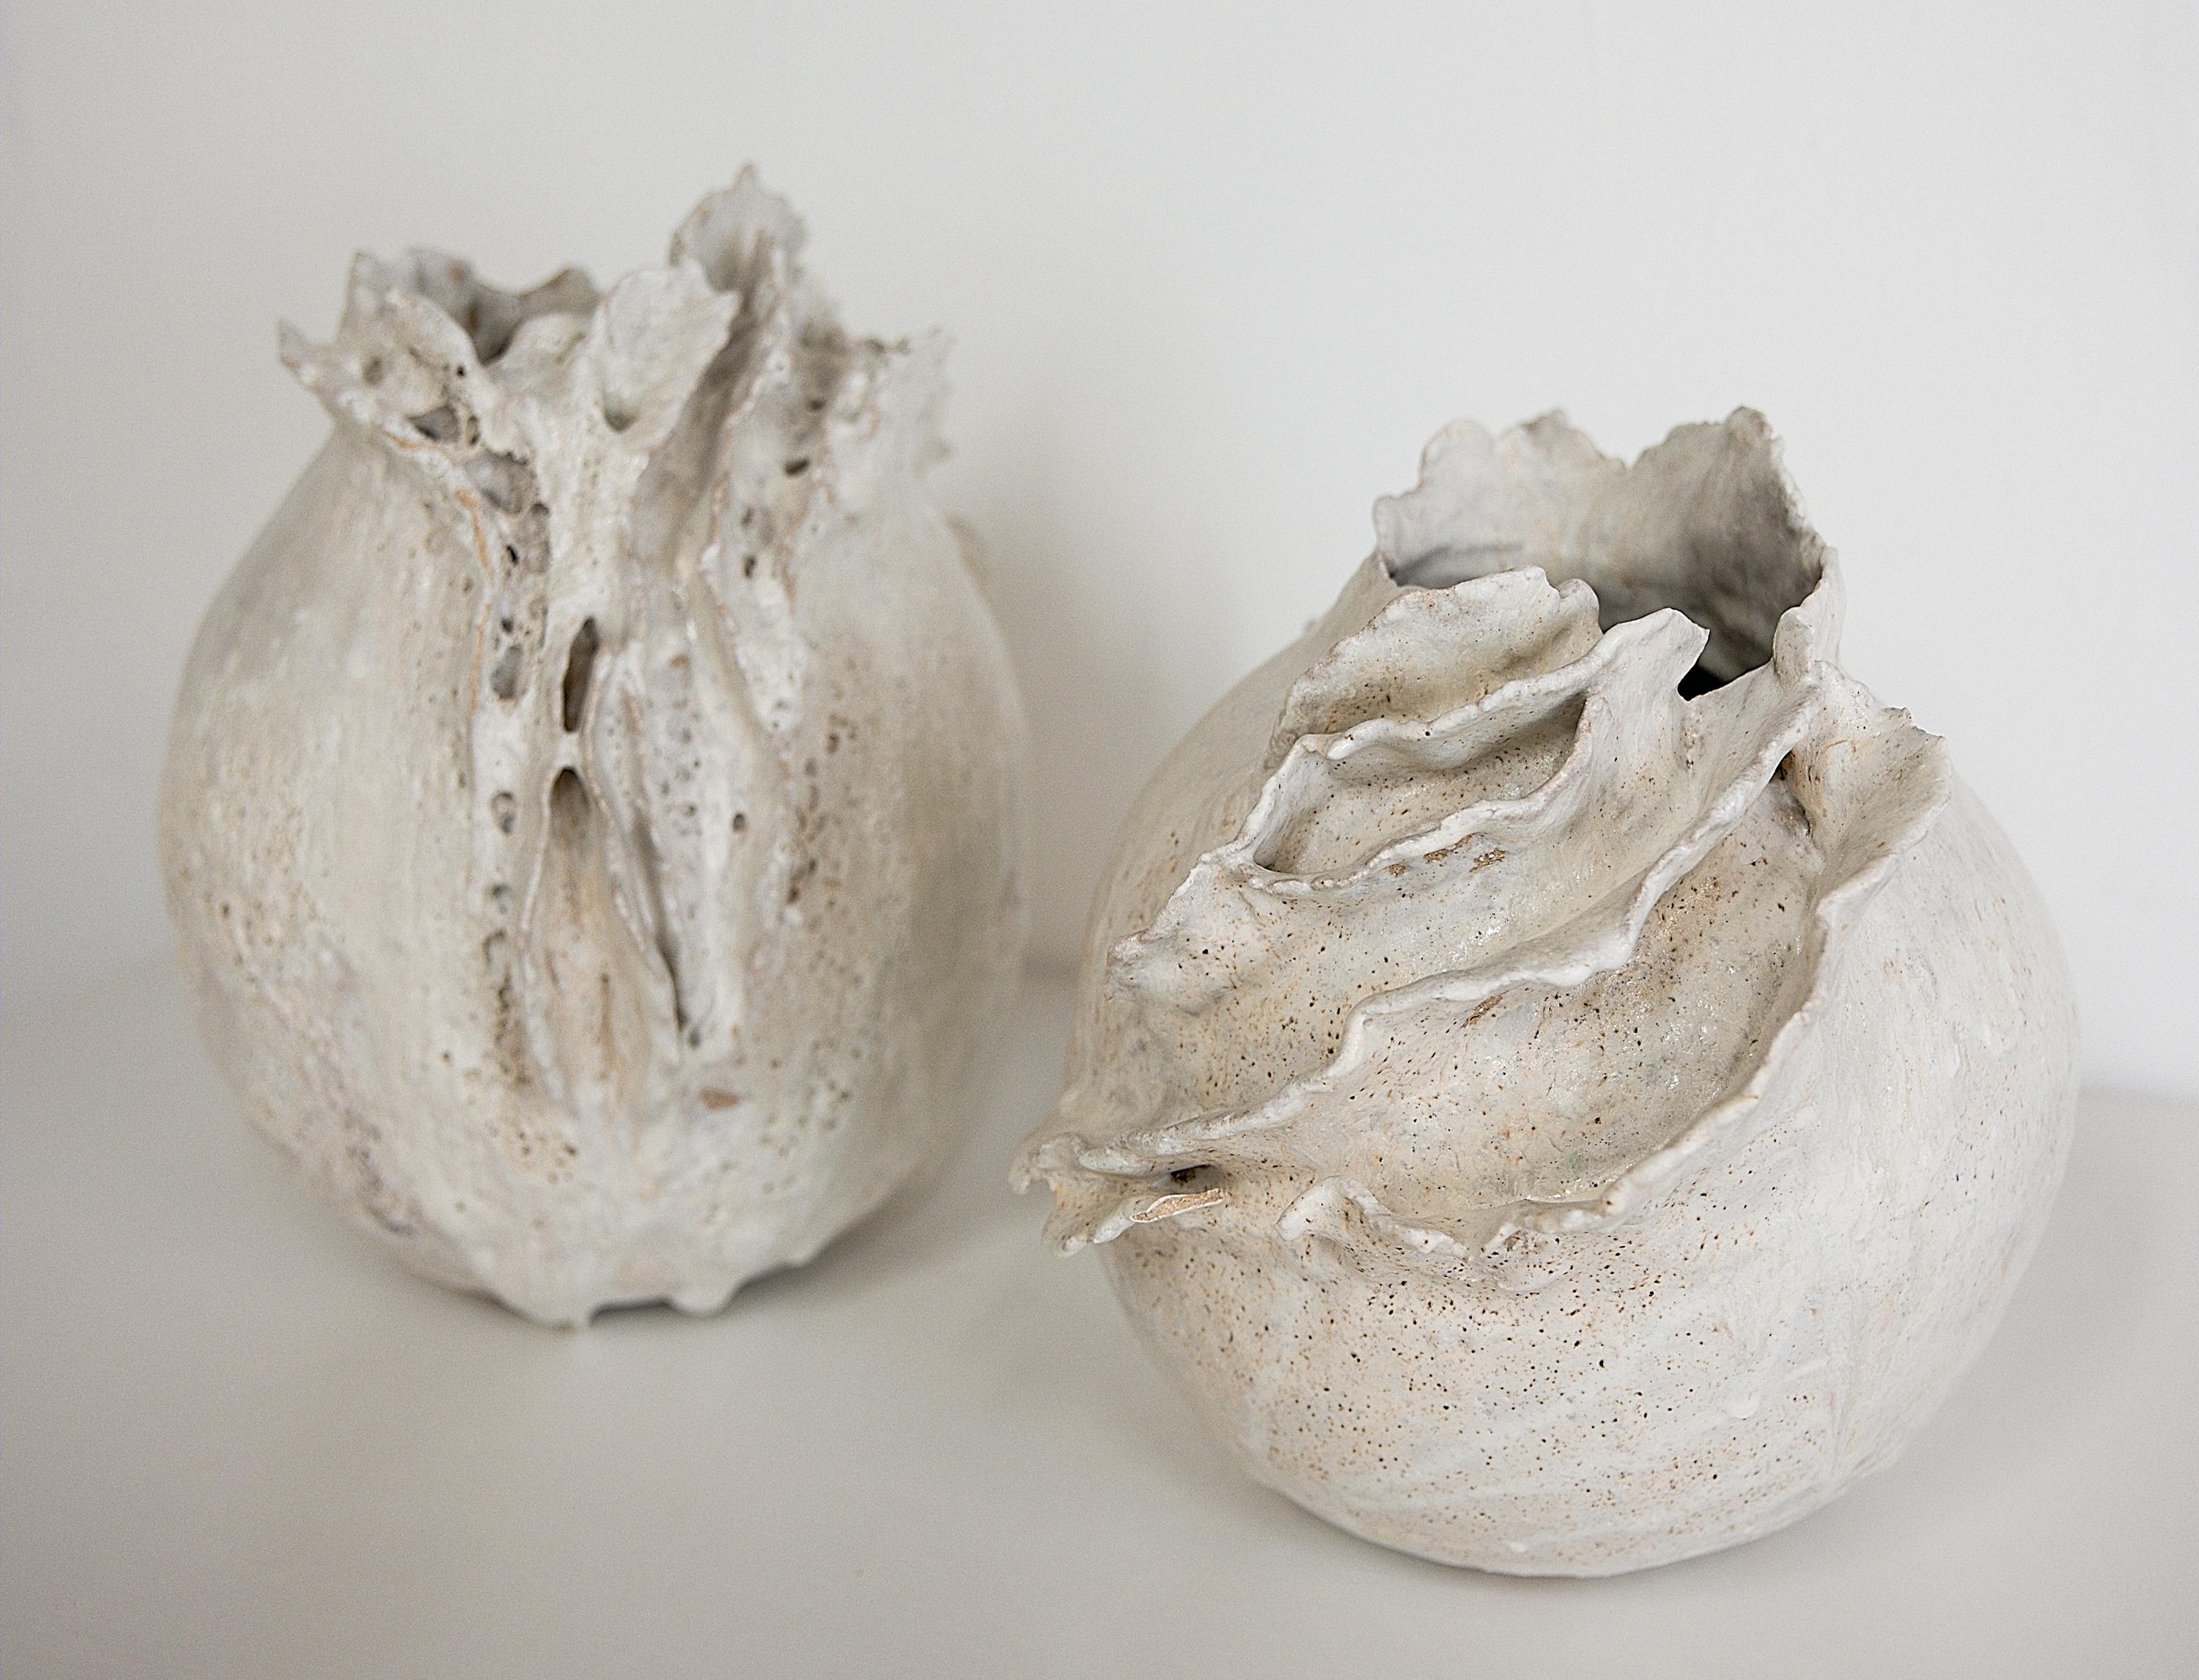 Bring a touch of modern style to your home with our Drift Torn Edge Vases
one of kind 
this White moon jar with Textured drips 
Oatmeal Matt glaze 
one of a kind

., each striking vase features a unique, moon-like design in an eye-catching light